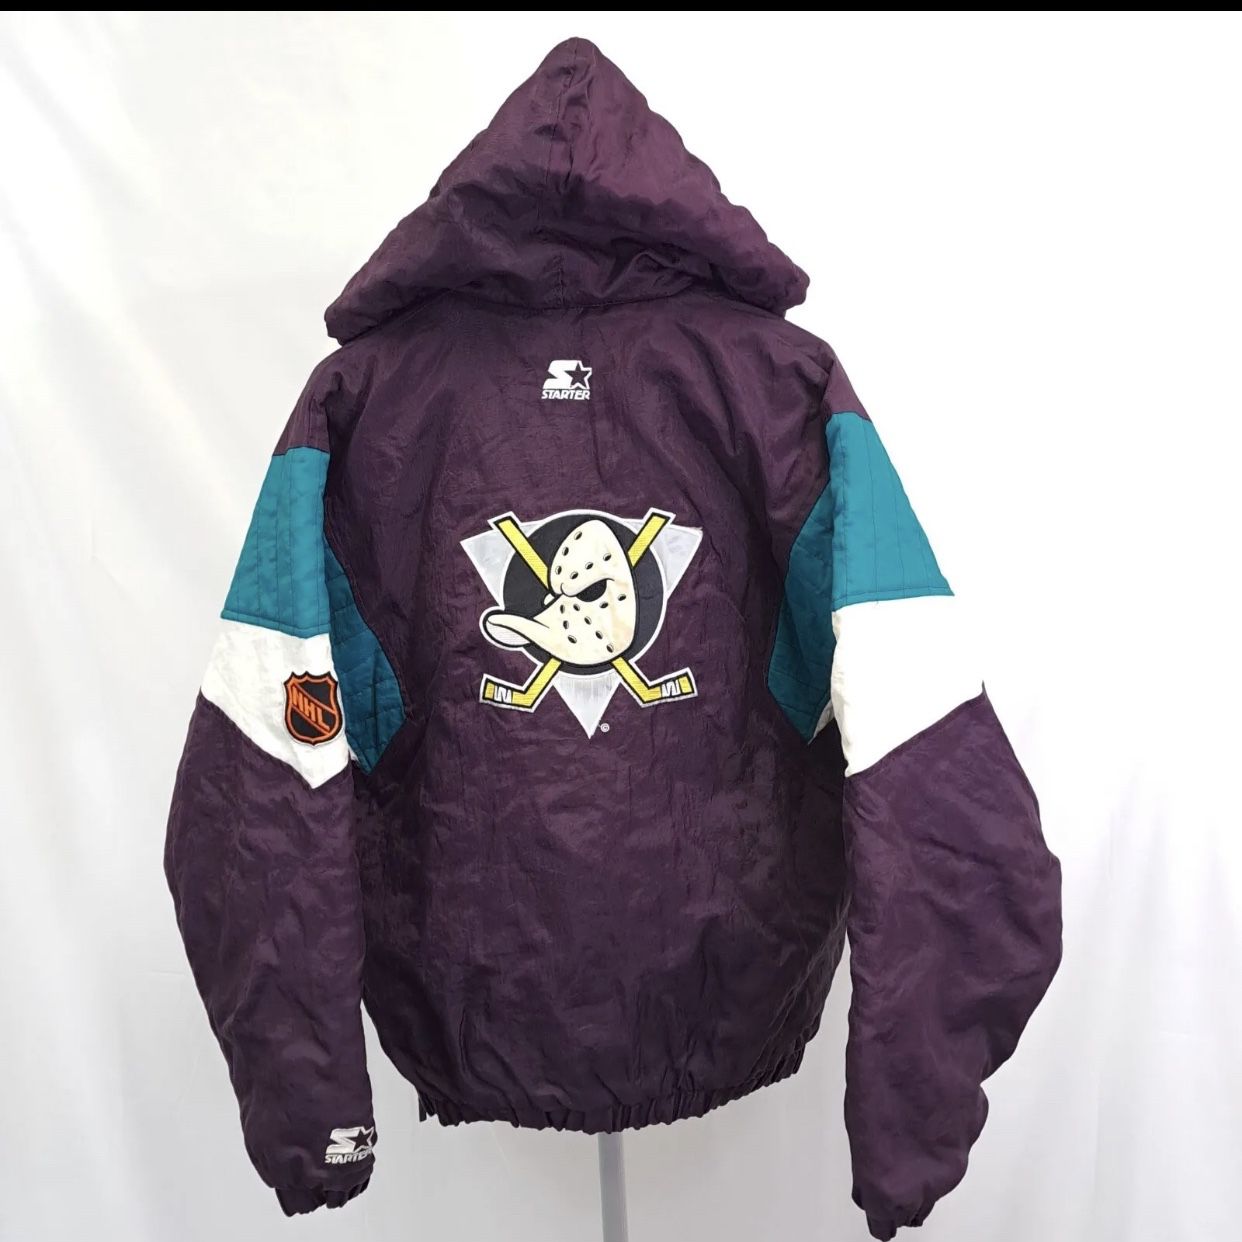 Vintage Mighty Ducks Starter Jacket for Sale in Chino Hills, CA 